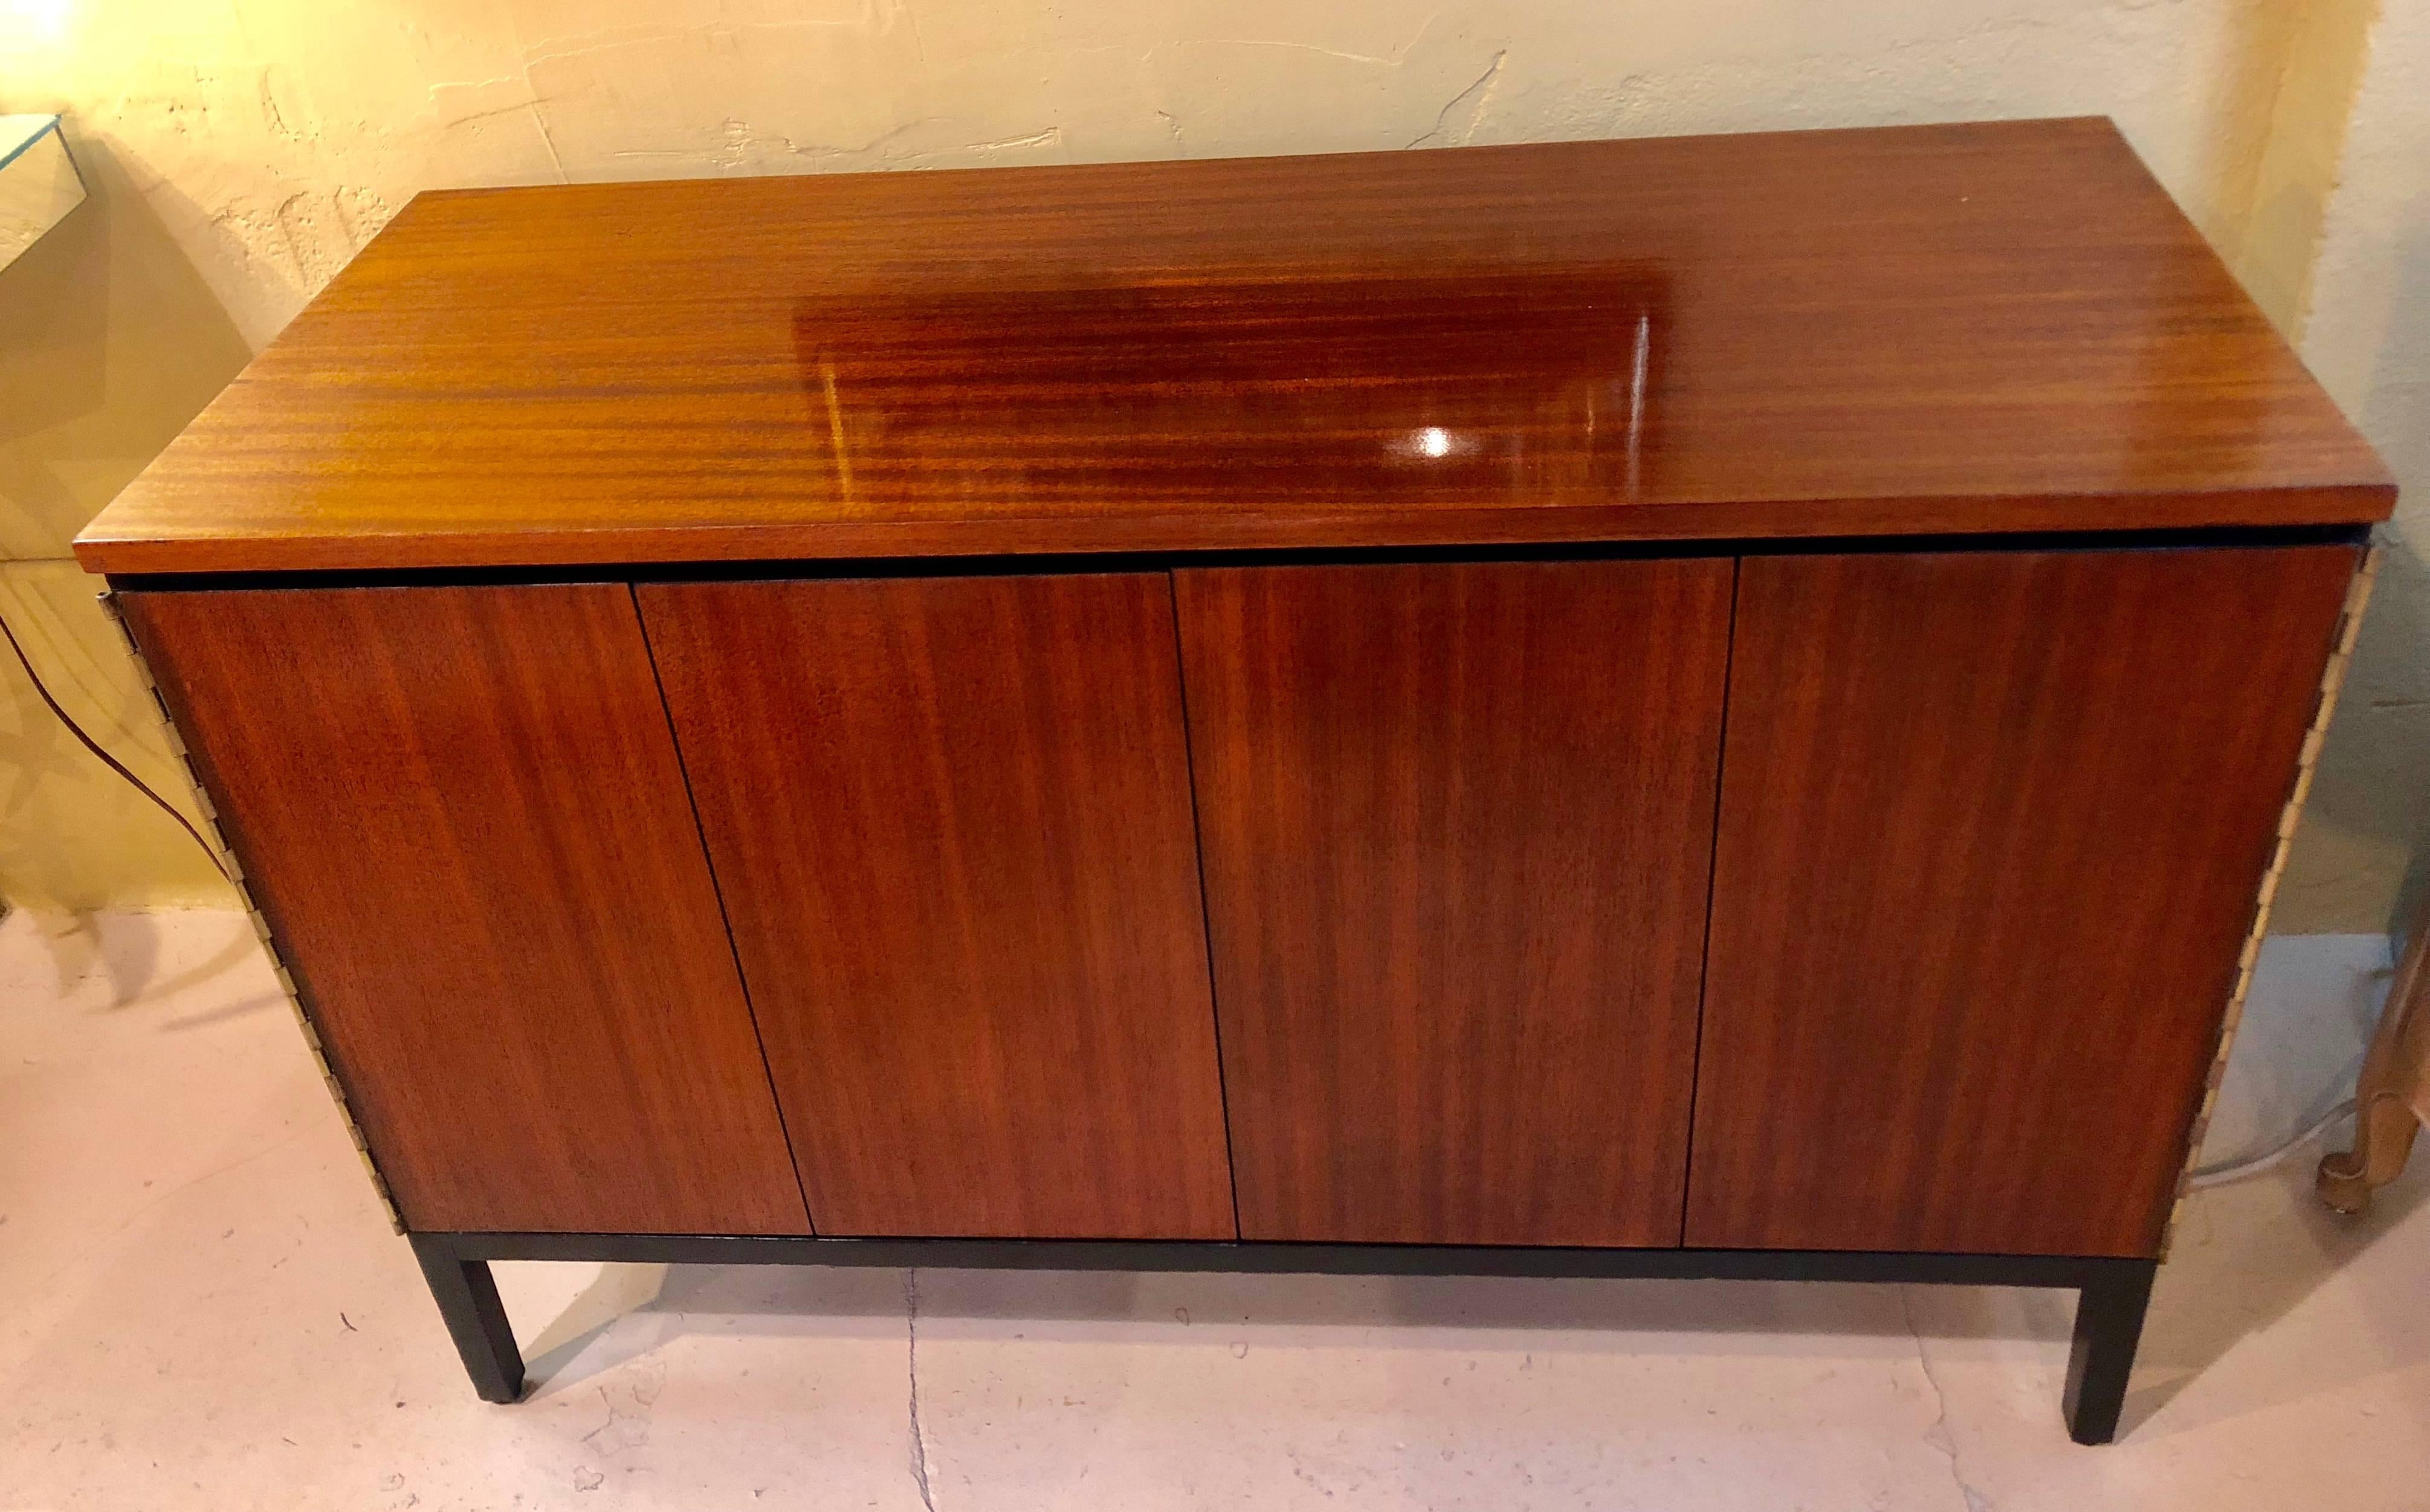 A fine custom quality pair of Mid-Century Modern Paul McCobb for Calvin chests or nightstands. Fine custom piano hinged doors leading to exceptional fitted and ebonized interiors. Each having multiple drawers. One with full drawers and one with side